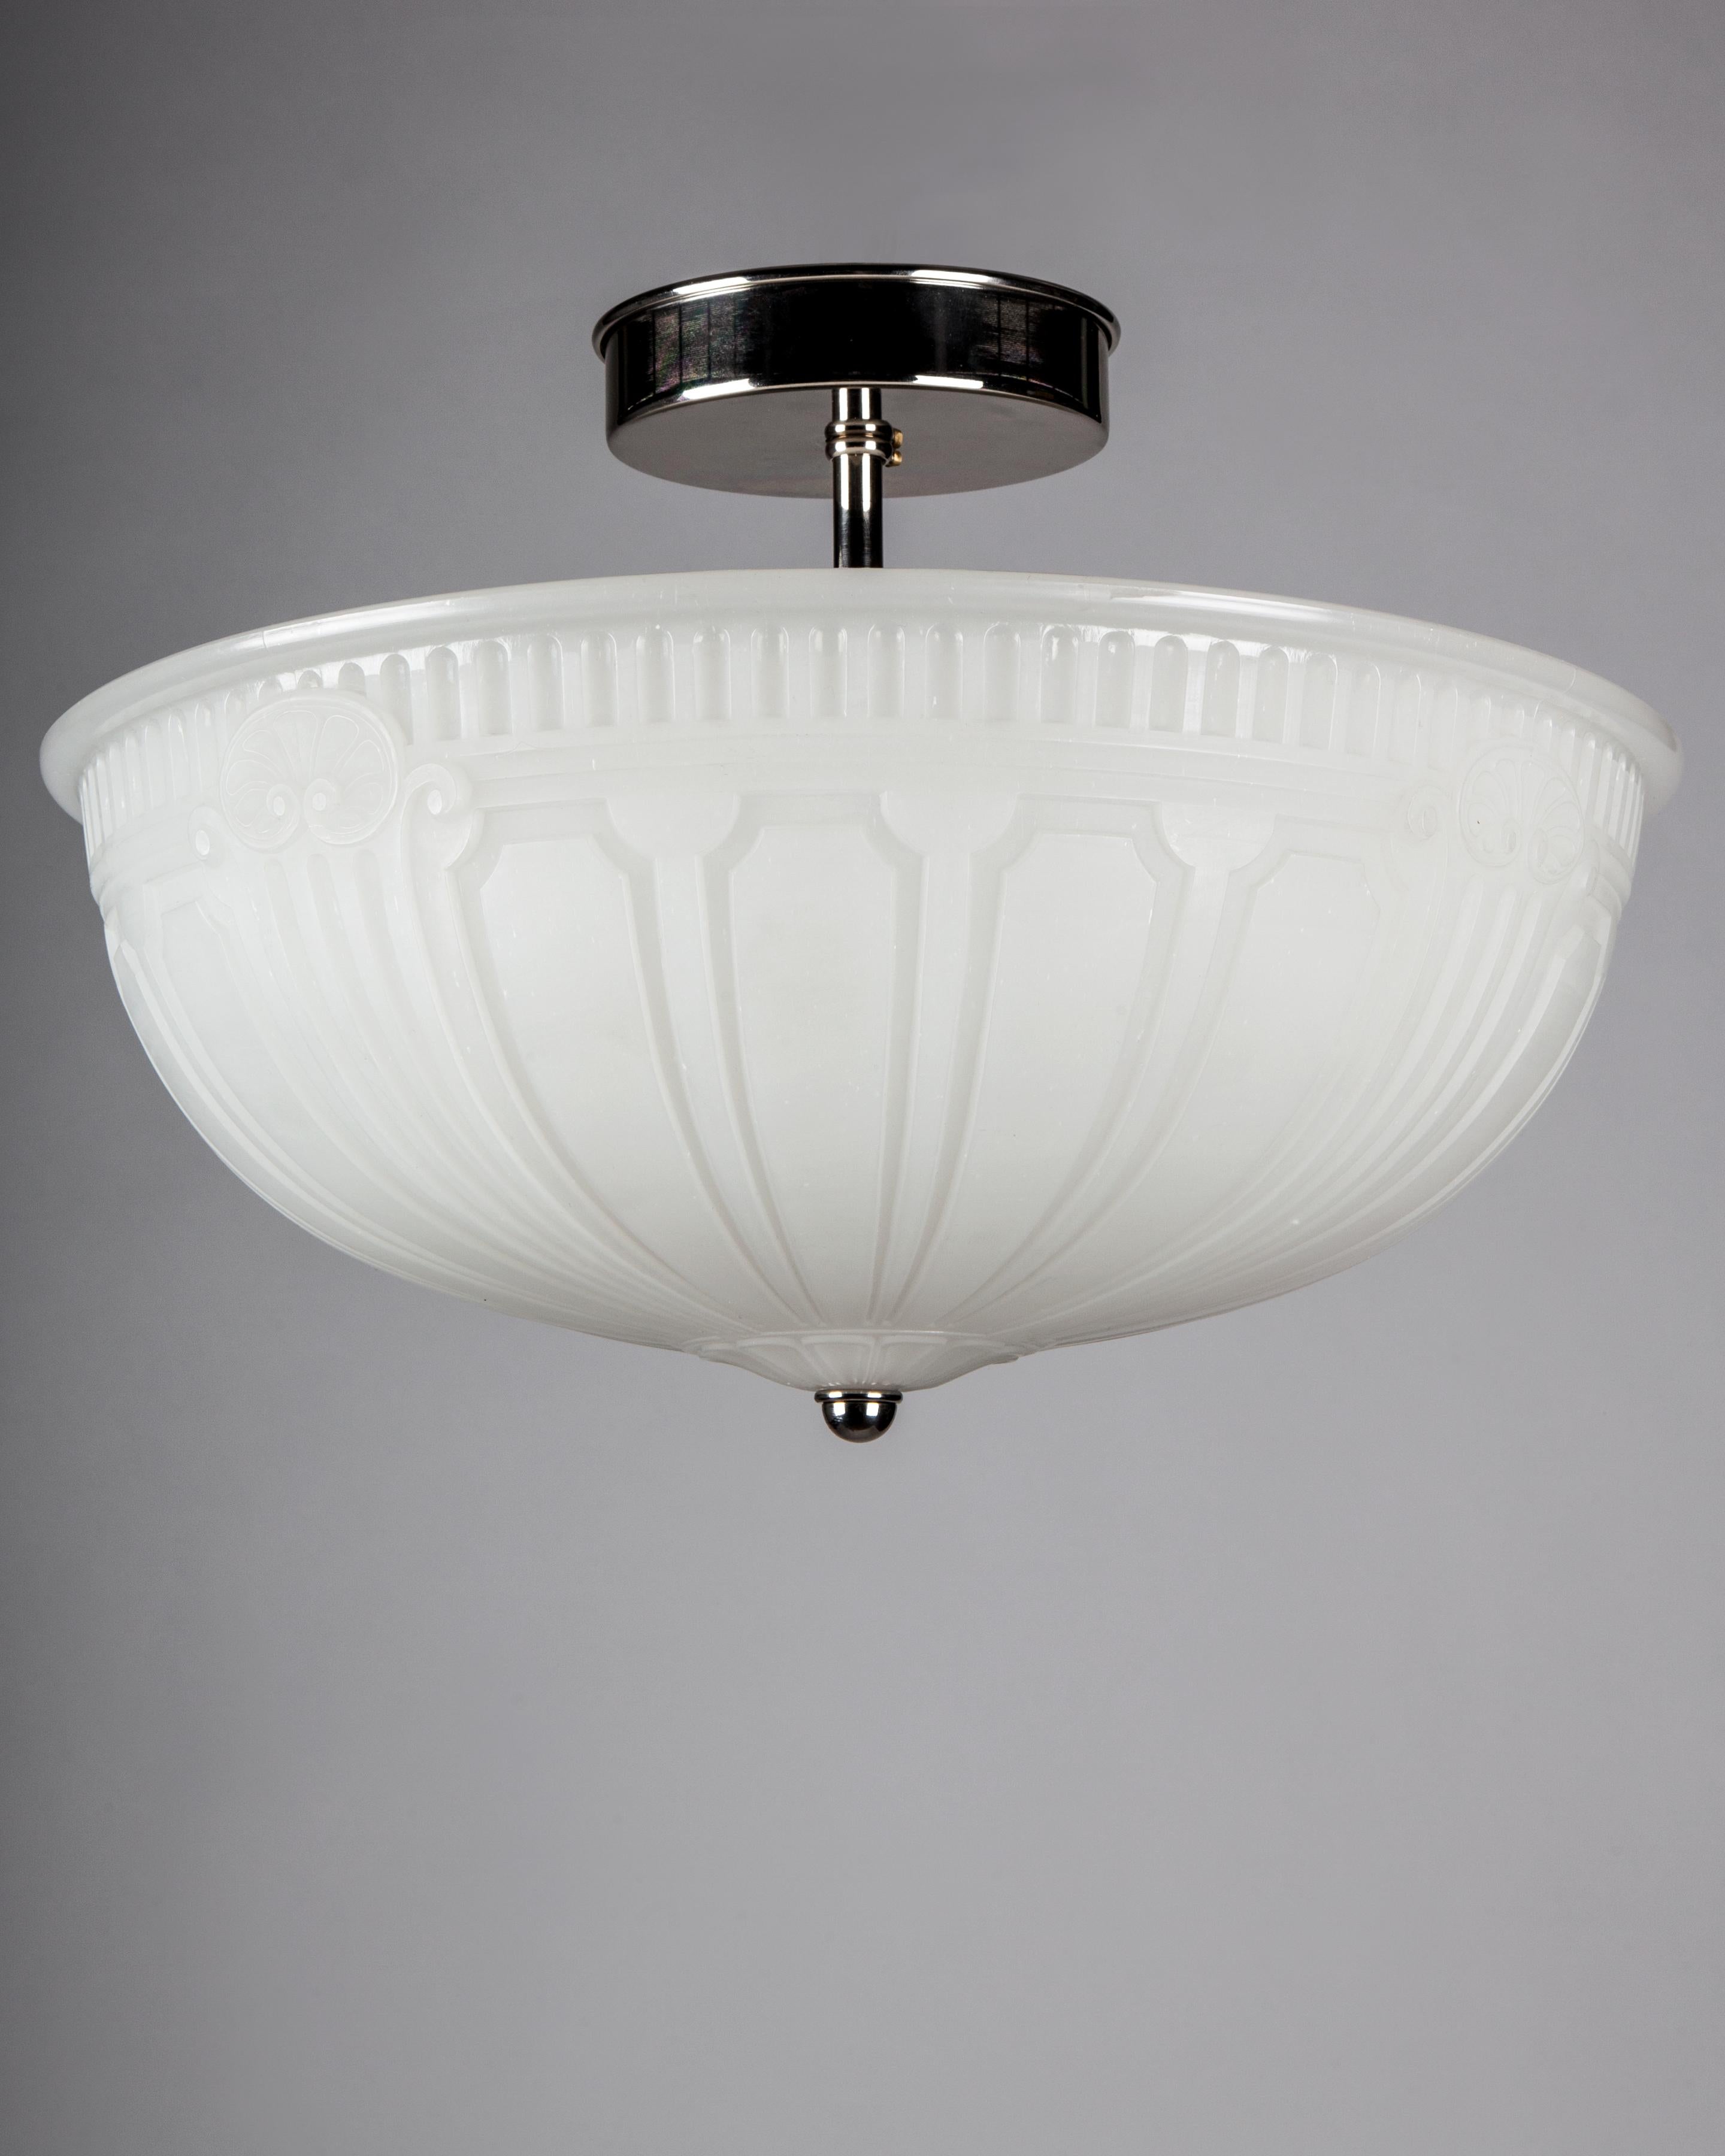 AHL4122

An antique 1920s cast opaline glass semi-flush mount with a faceted top border and a tapered panel dome bottom on polished nickel fittings made in the Remains Lighting workshop. Due to the antique nature of this fixture, there may be some